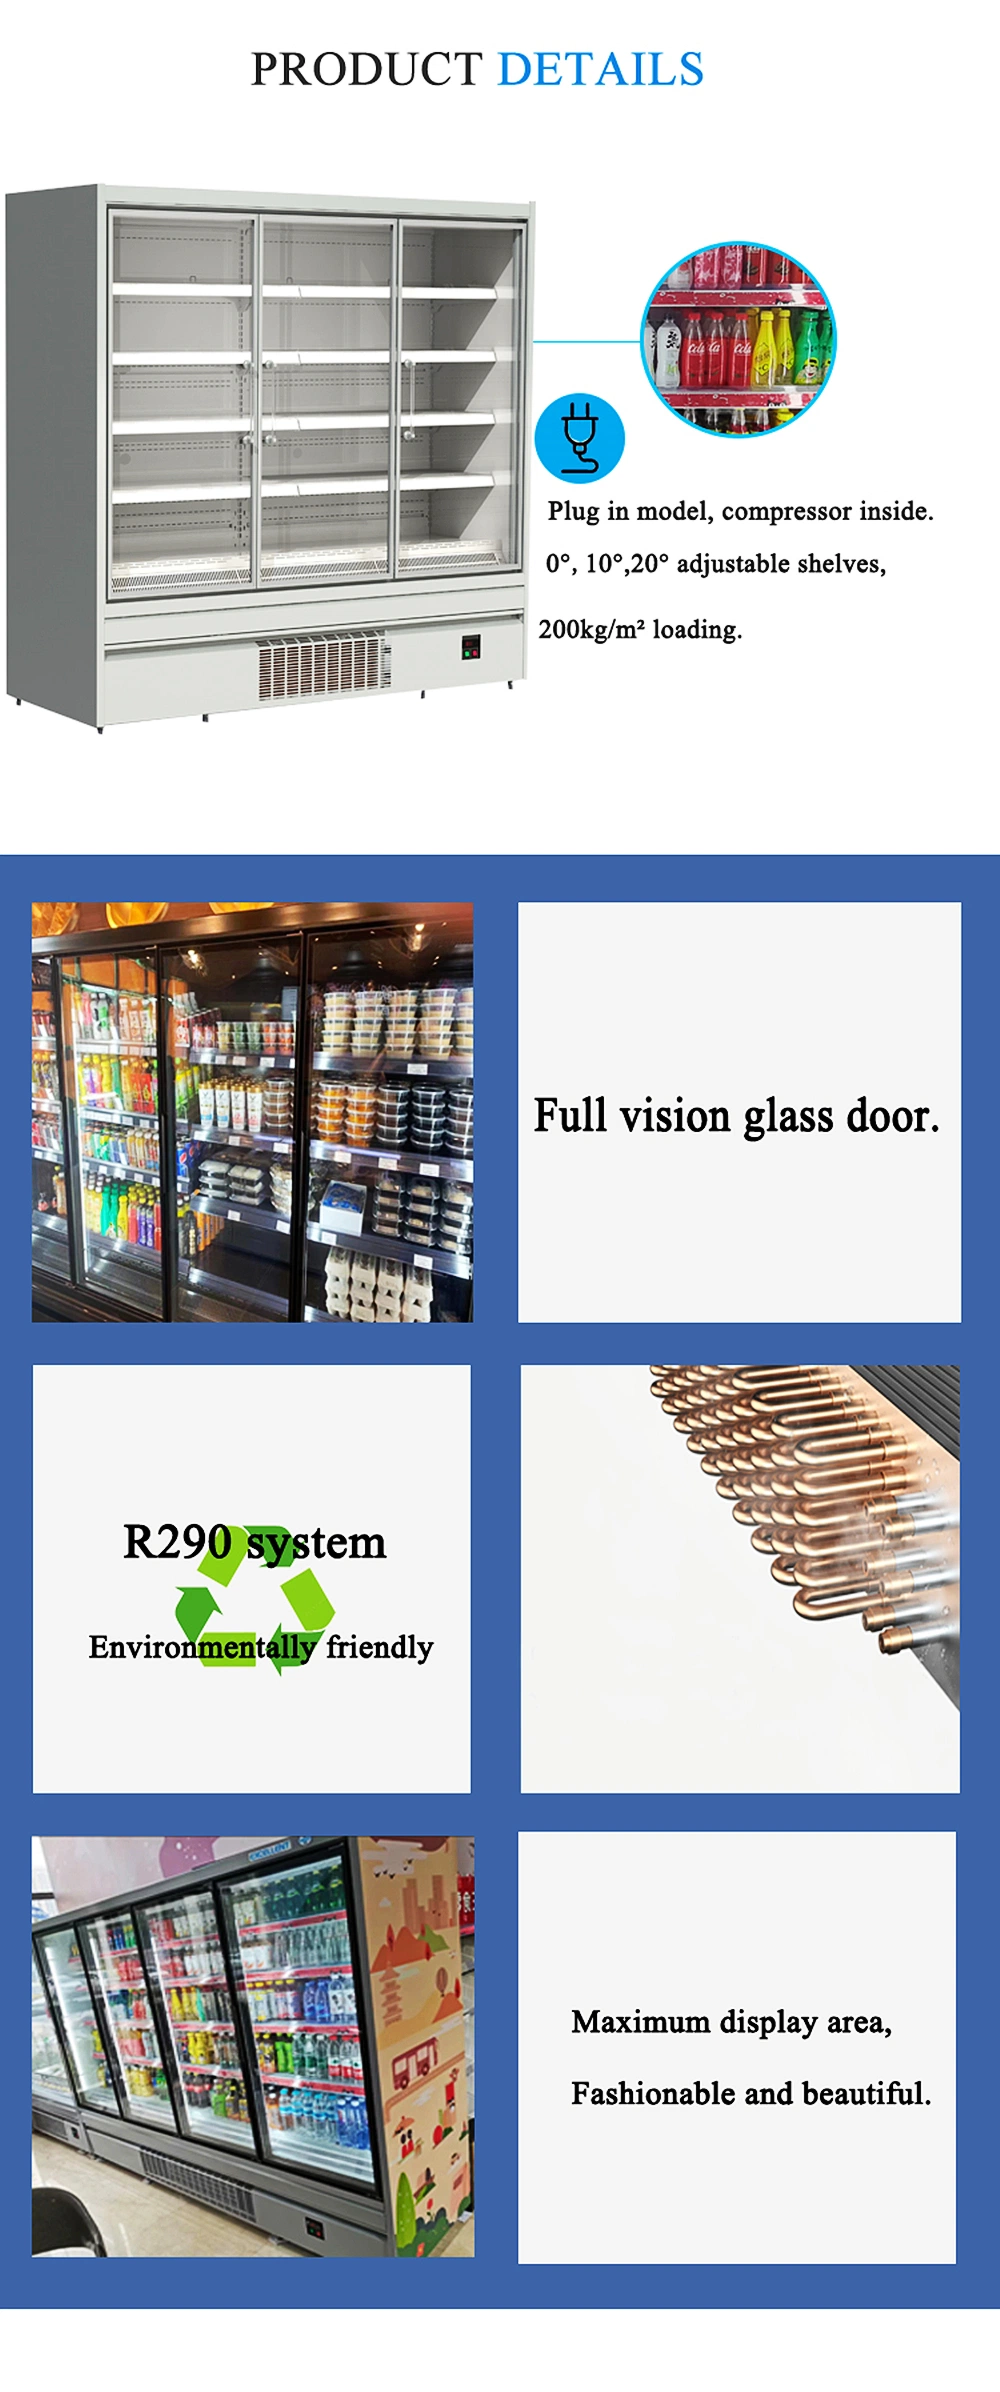 Glass Door Plug-in Upright Chiller Refrigerator for Convenience Store